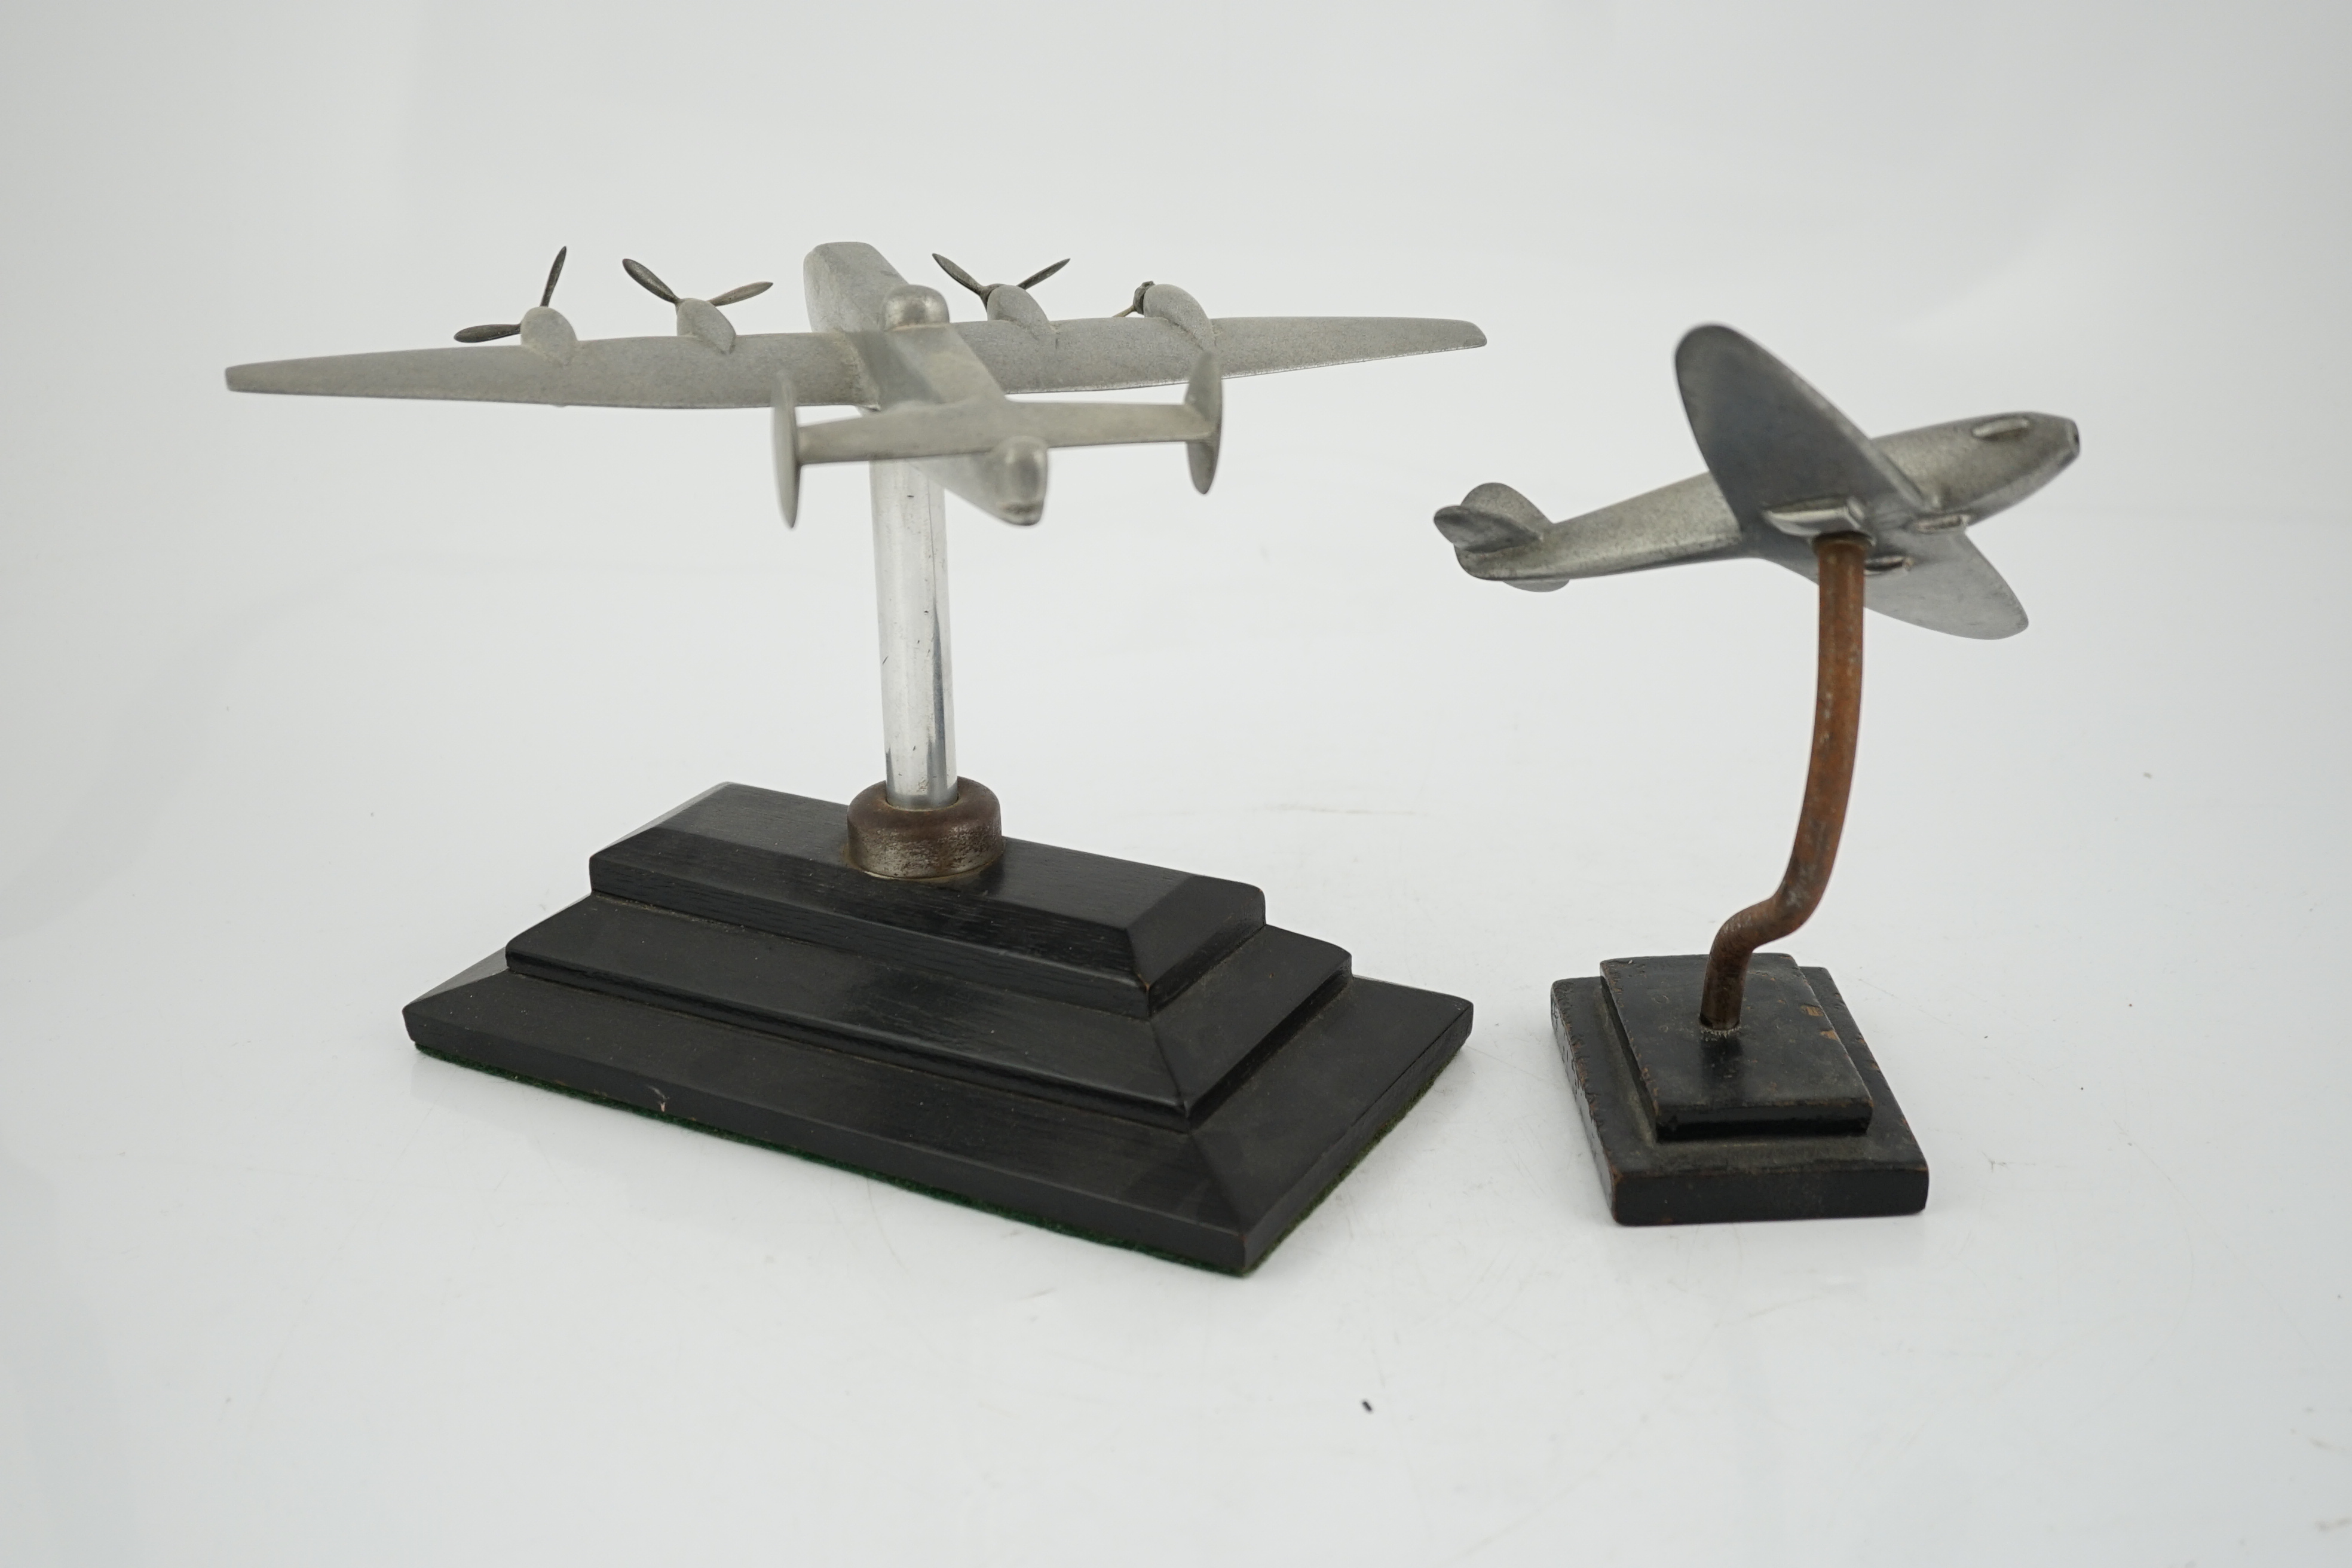 Two cast aluminium military aircraft models mounted on stepped wooden bases; a Halifax bomber, wingspan 30.5cm, and a Hawker Hurricane, wingspan 18cm